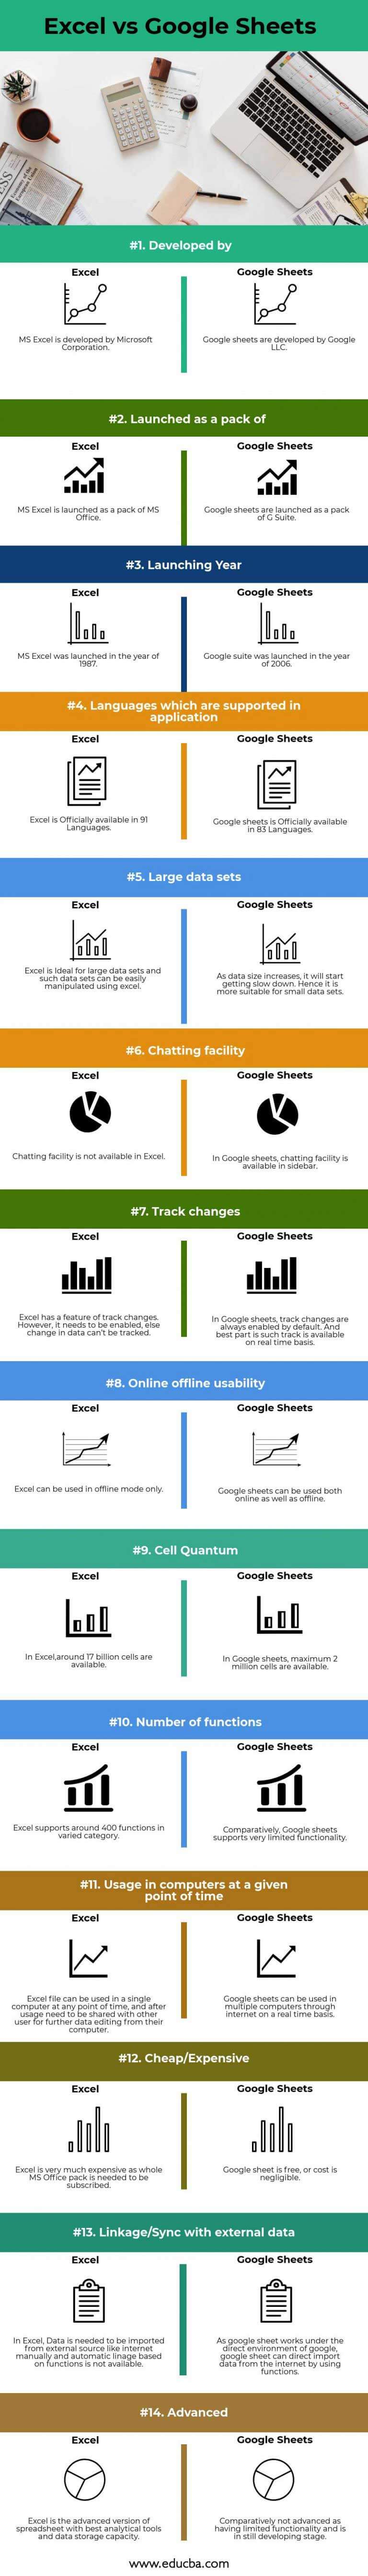 difference between excel 2019 and excel 365